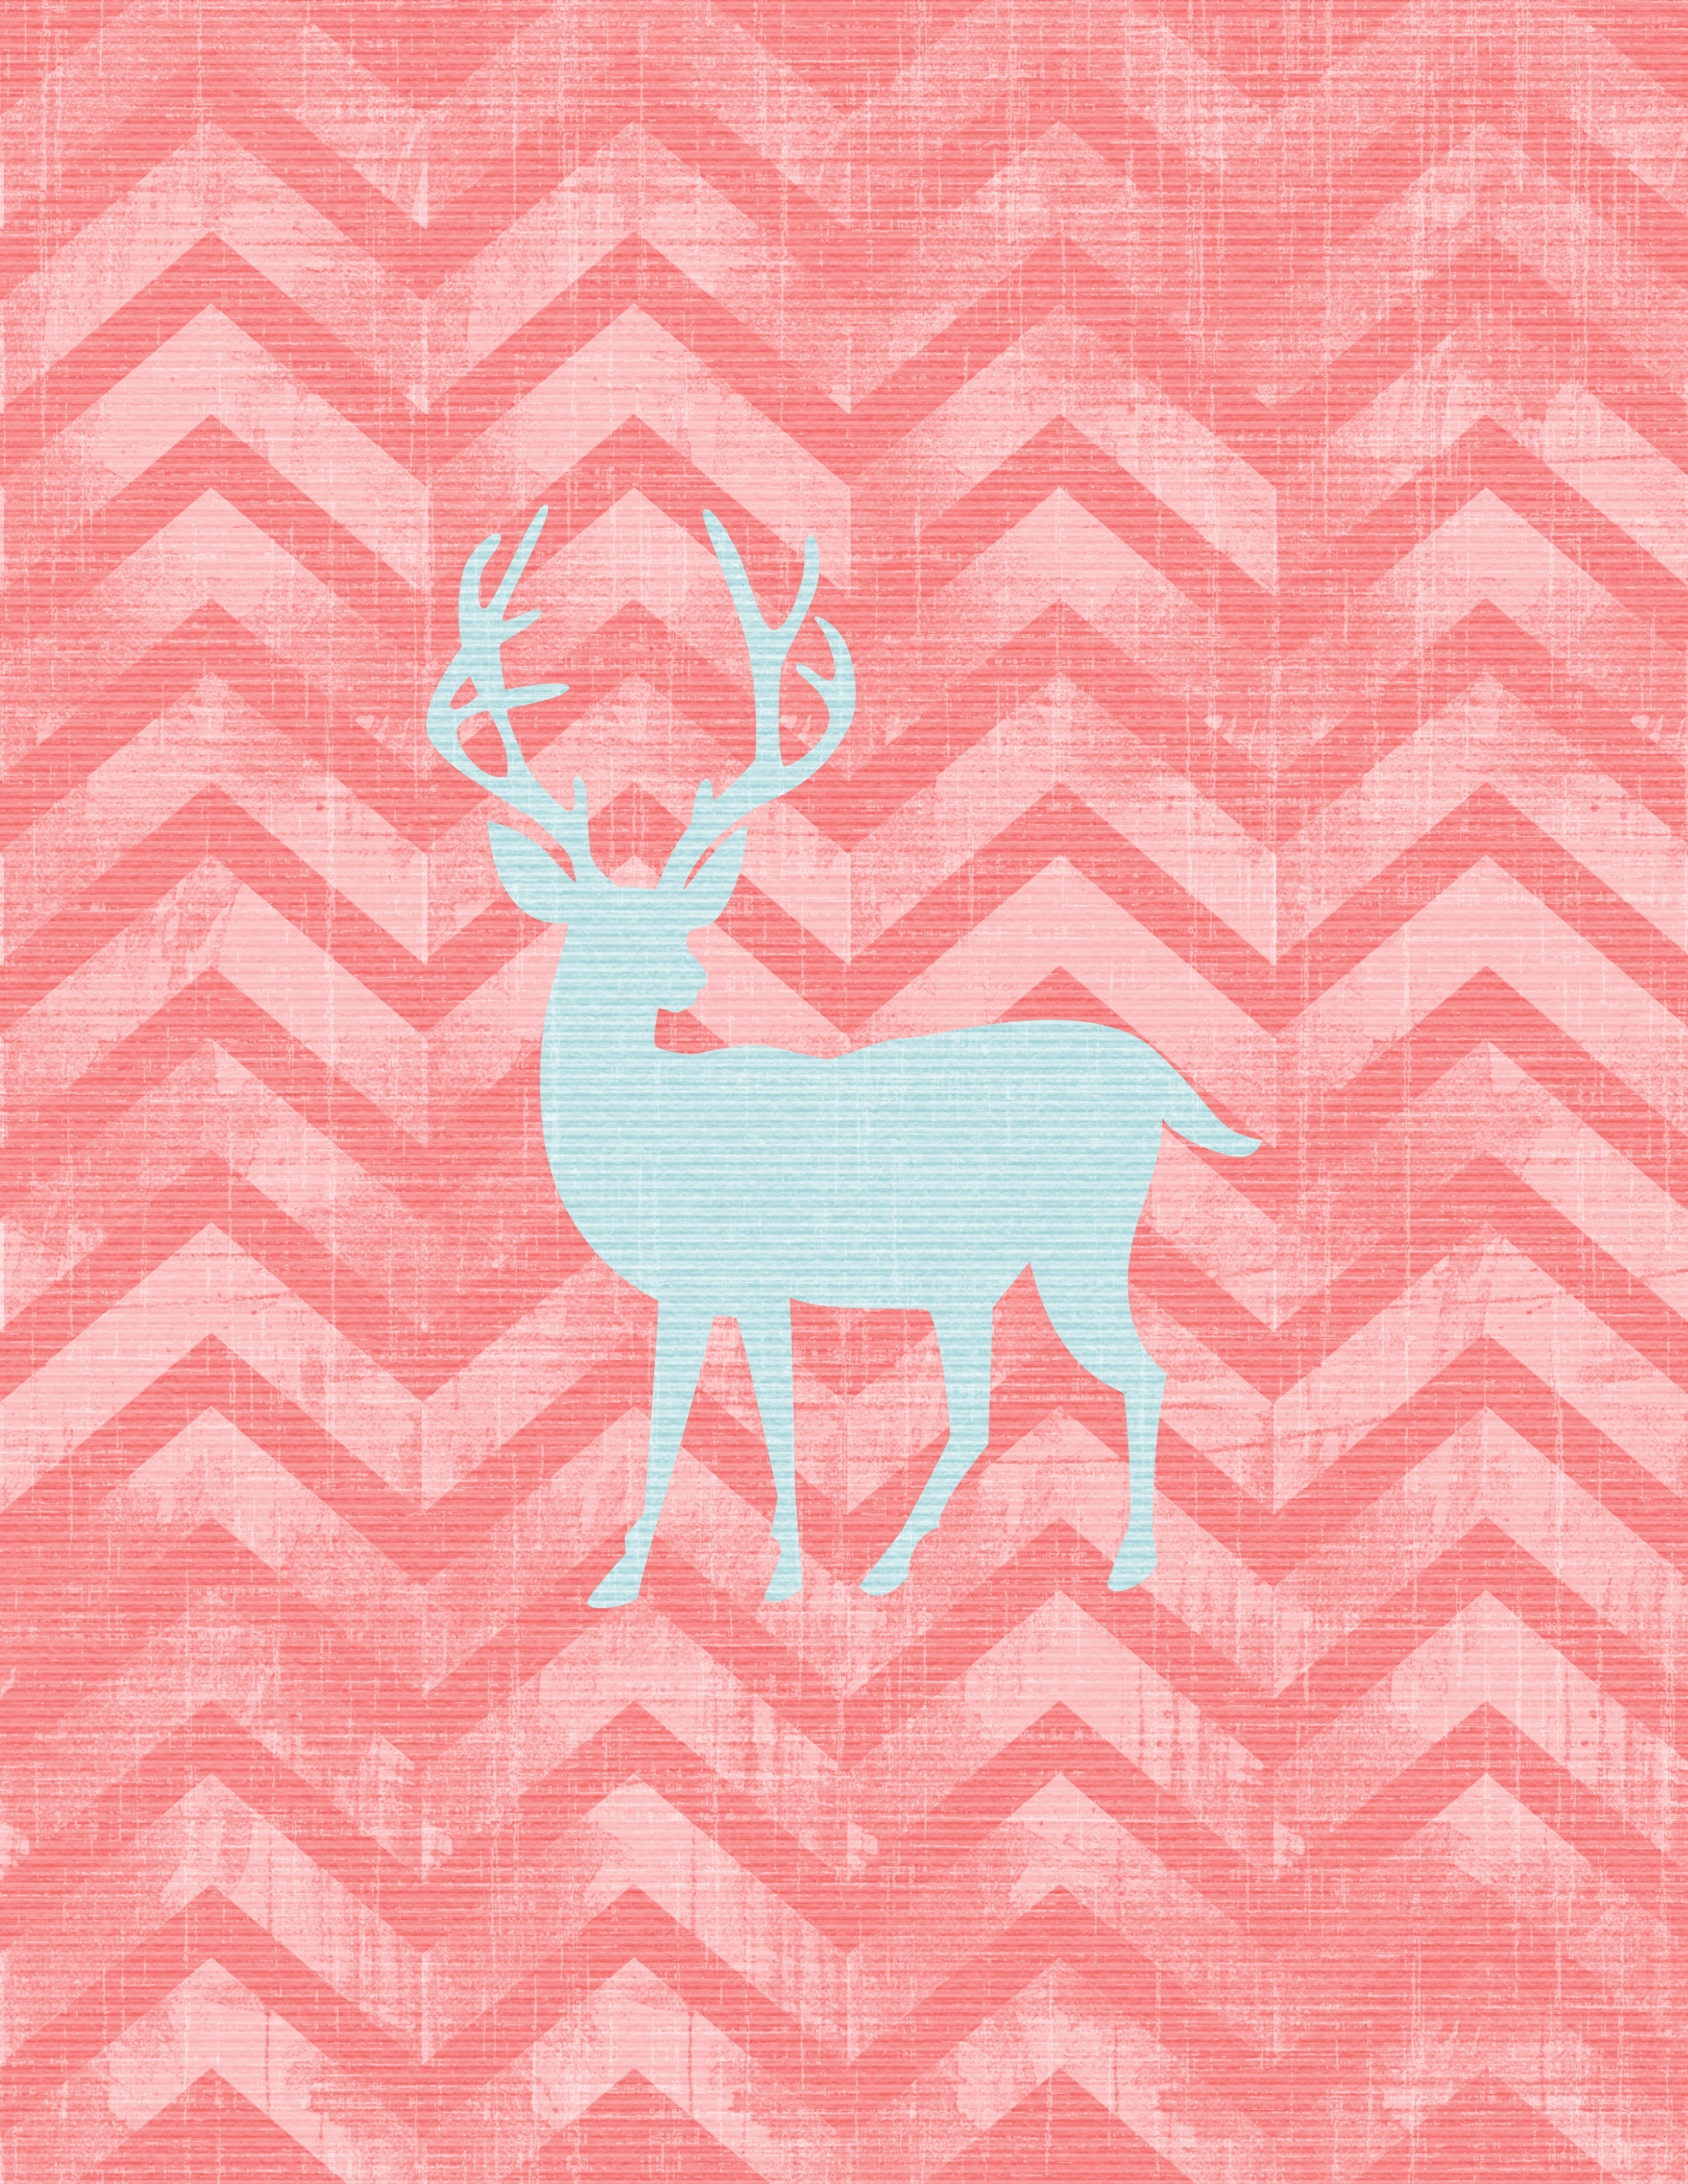 Free Printable Deer Wall Art & Fabulous Friday - The Graffical Muse